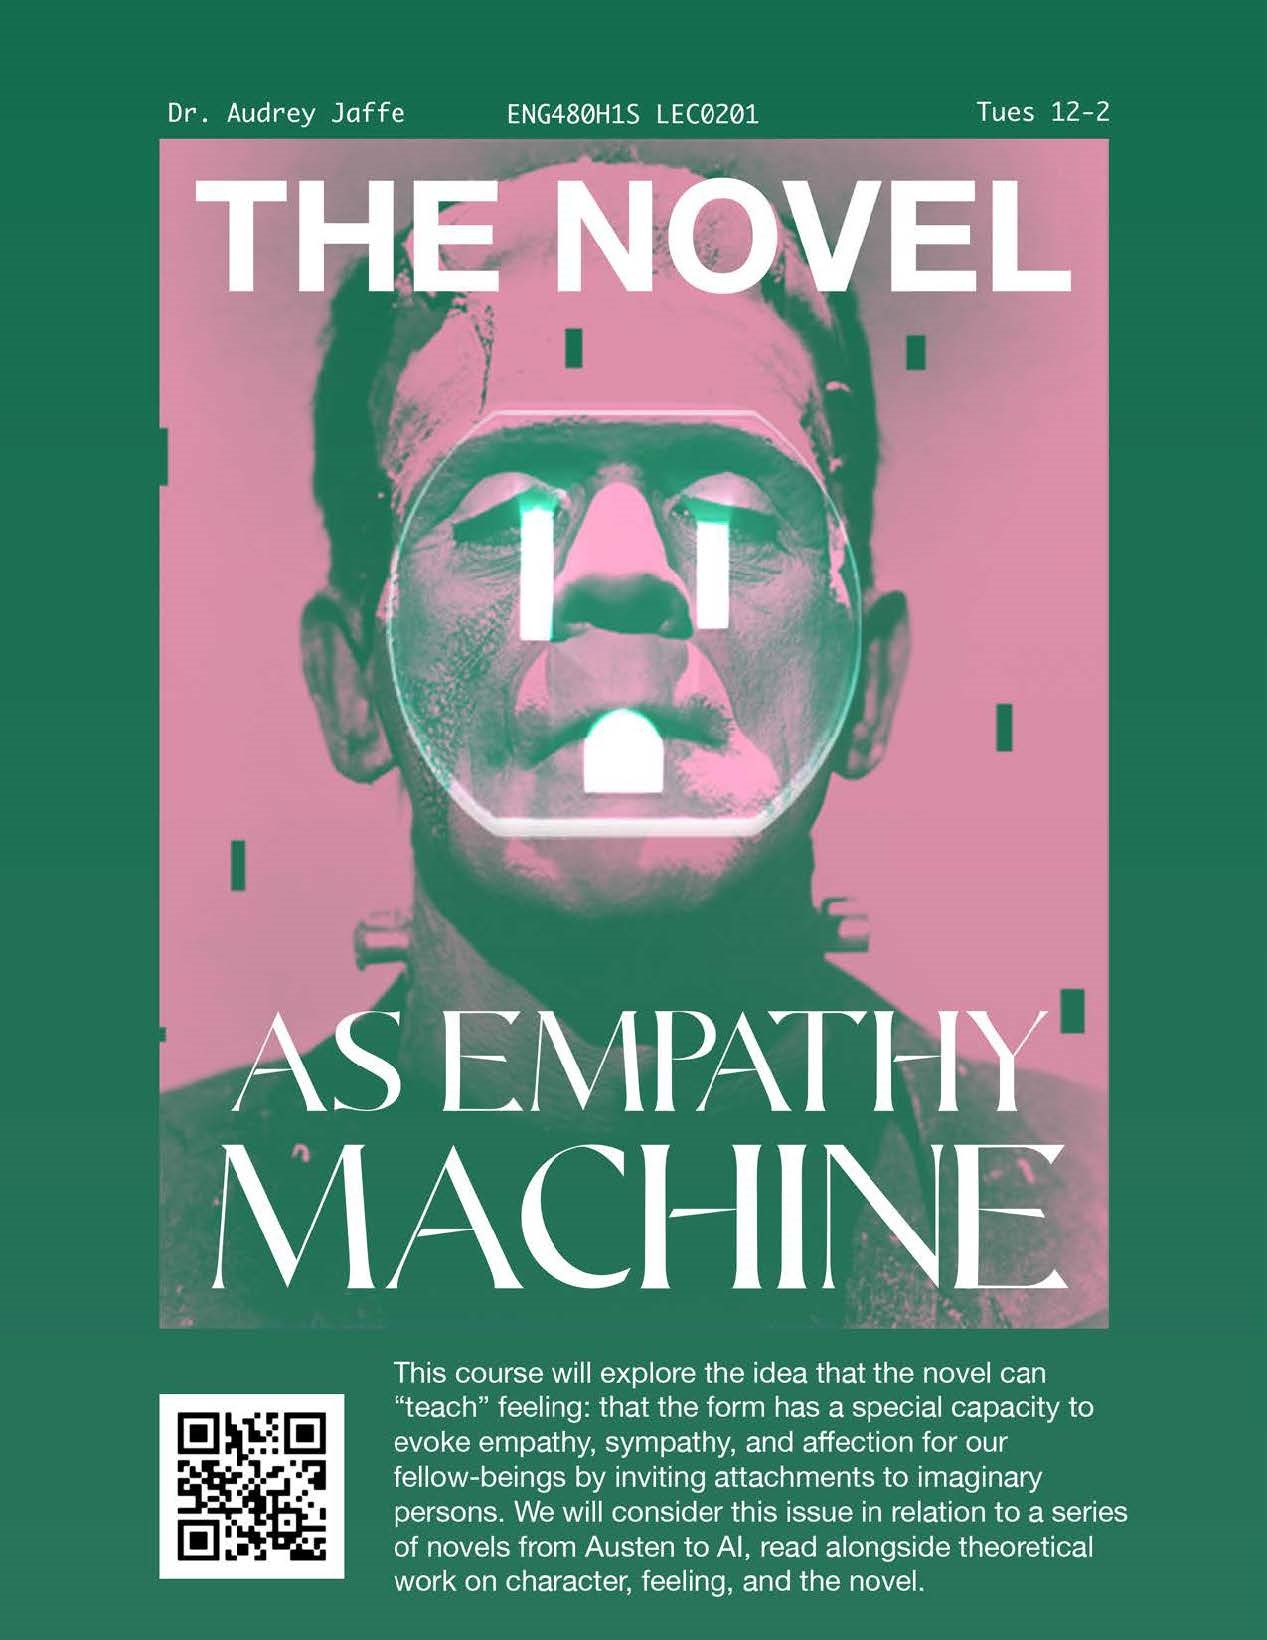 One of Andrew Chang’s first posters promotes the class “The Novel as Empathy Machine”, taught by Professor Audrey Jaffe.